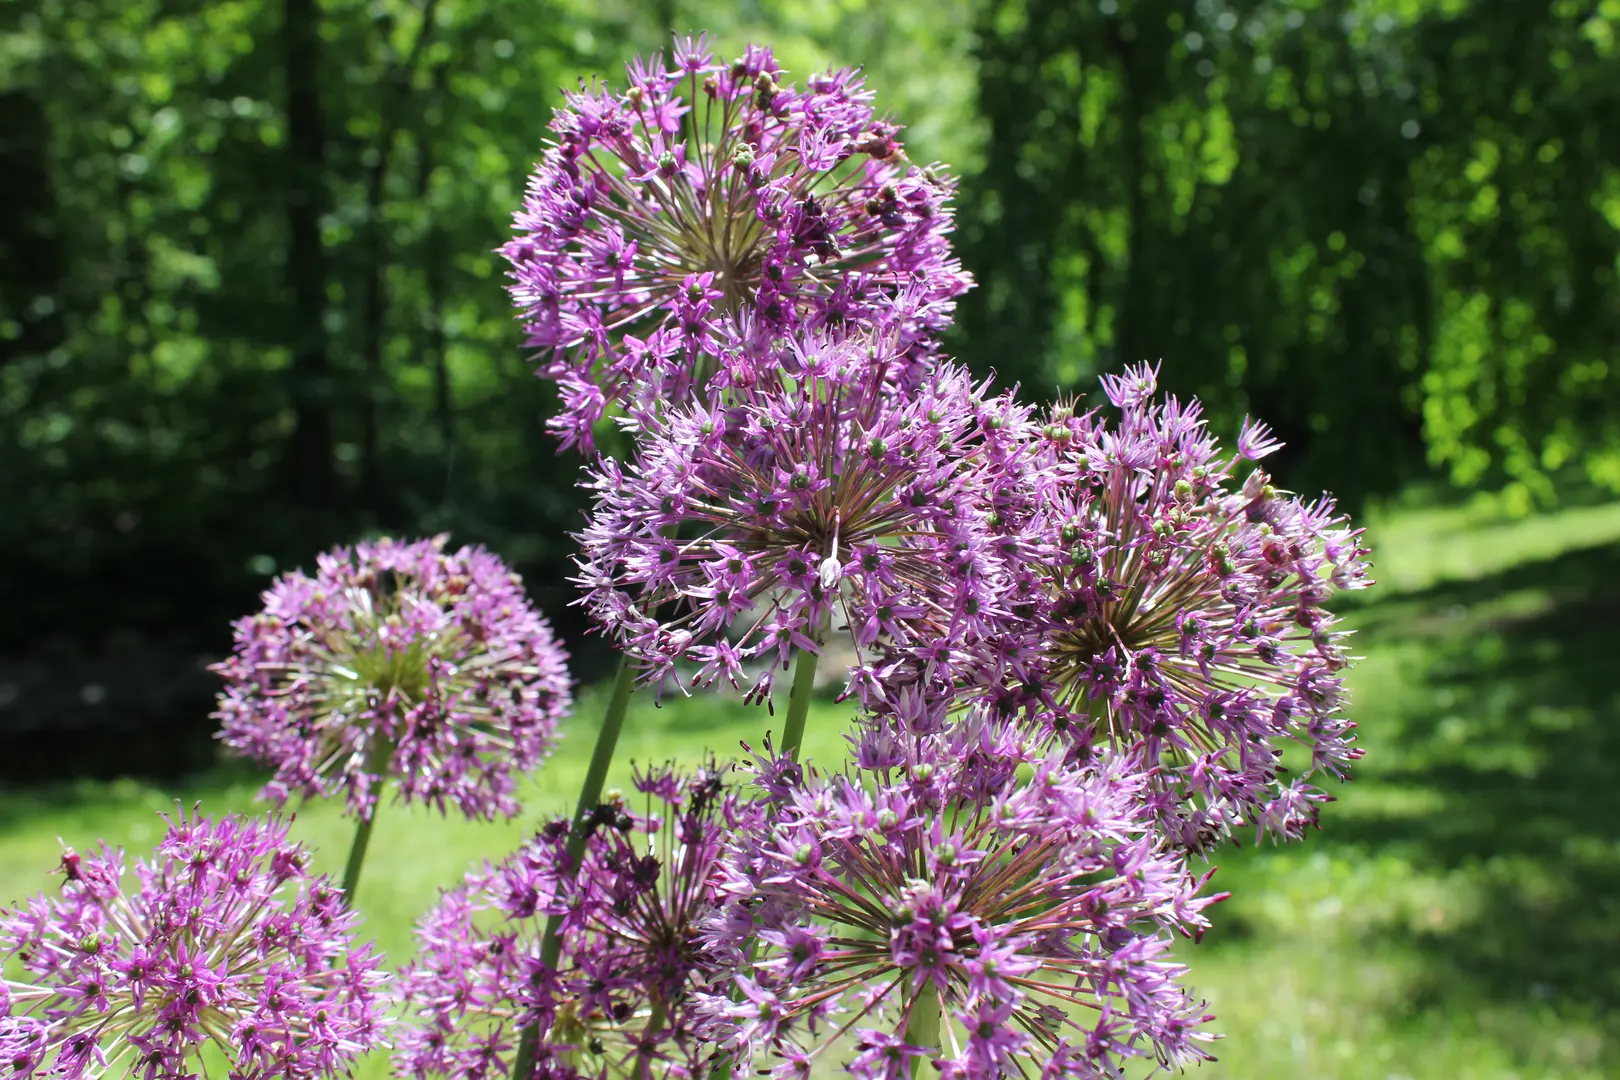 A view of purple flowers